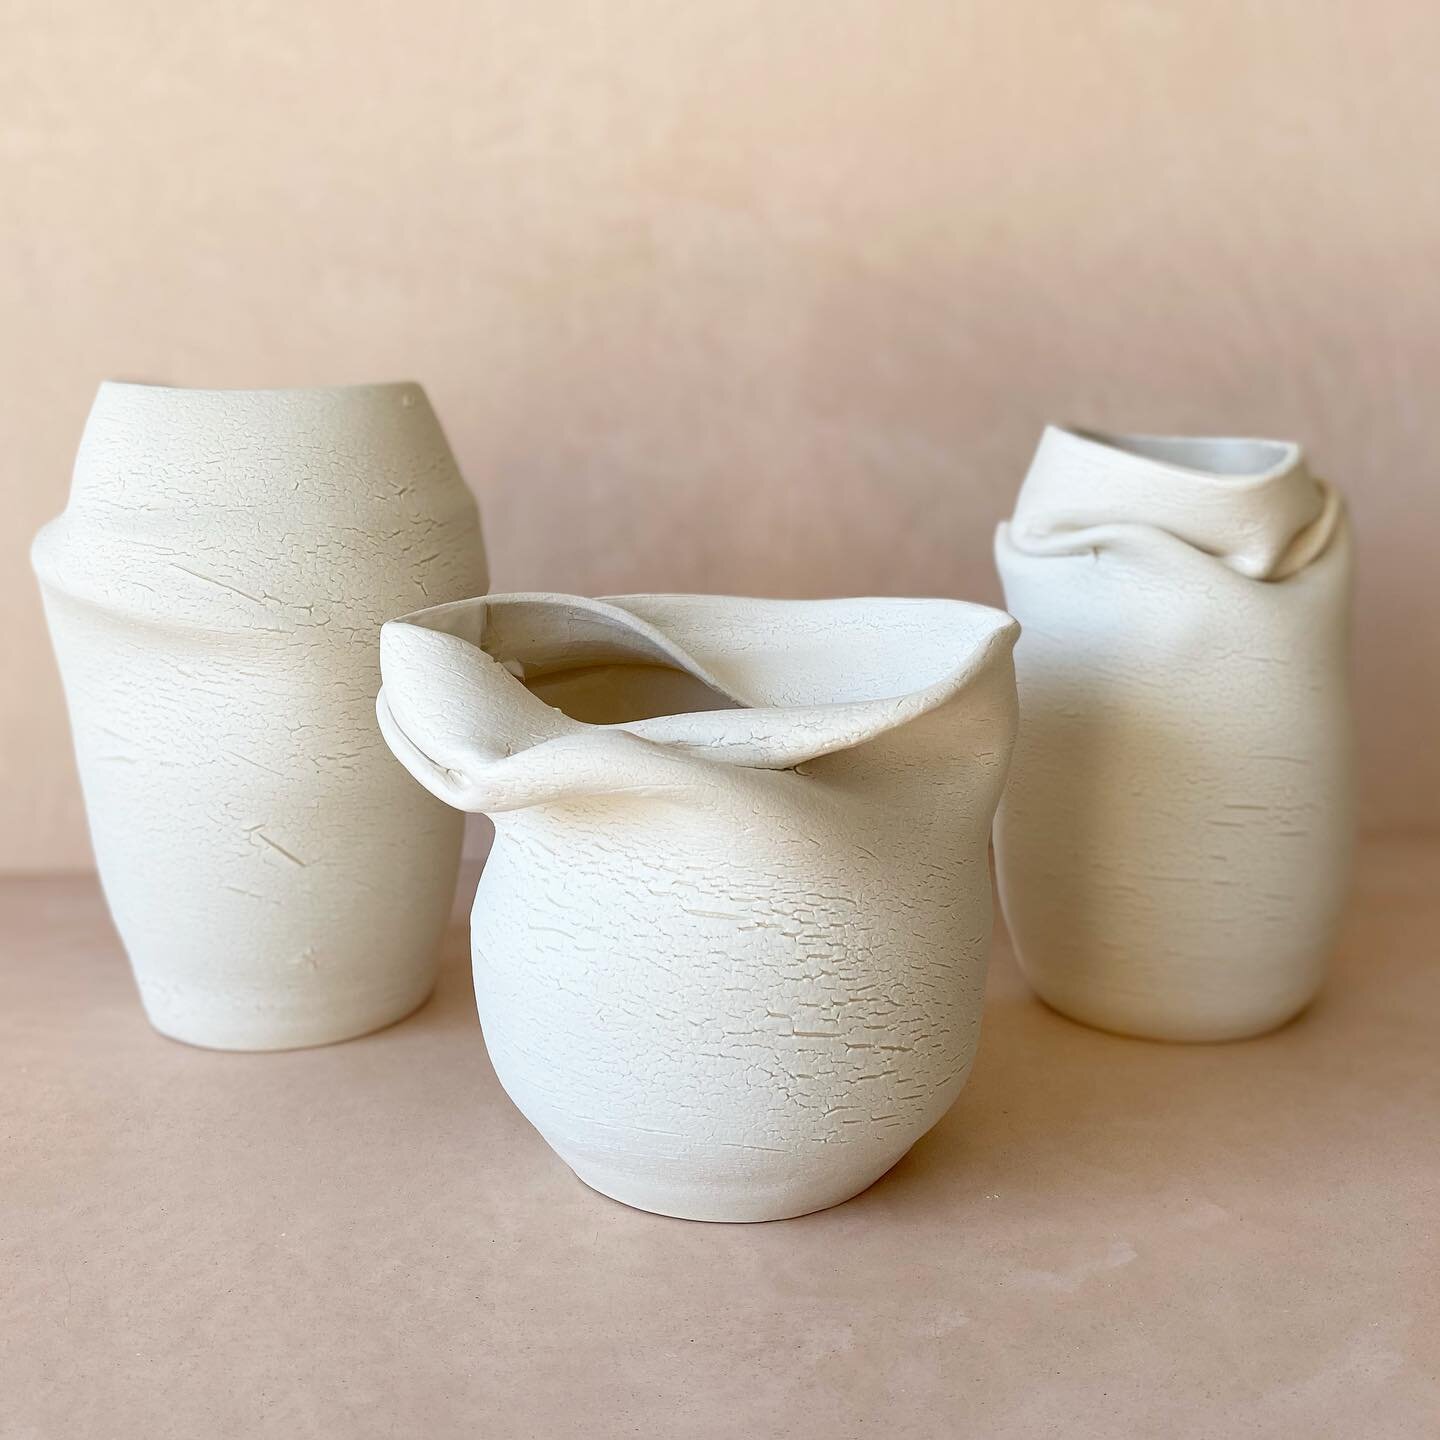 w a b i - s a b i //
Ceramics taught me how to embrace the beauty of imperfection. I hope my one-of-a-kind pieces inspire others in the same way
.
.
.
#ceramics #pottery #vases #minimalist #whitevases #textures #pottery #modernceramics #artist #ceram